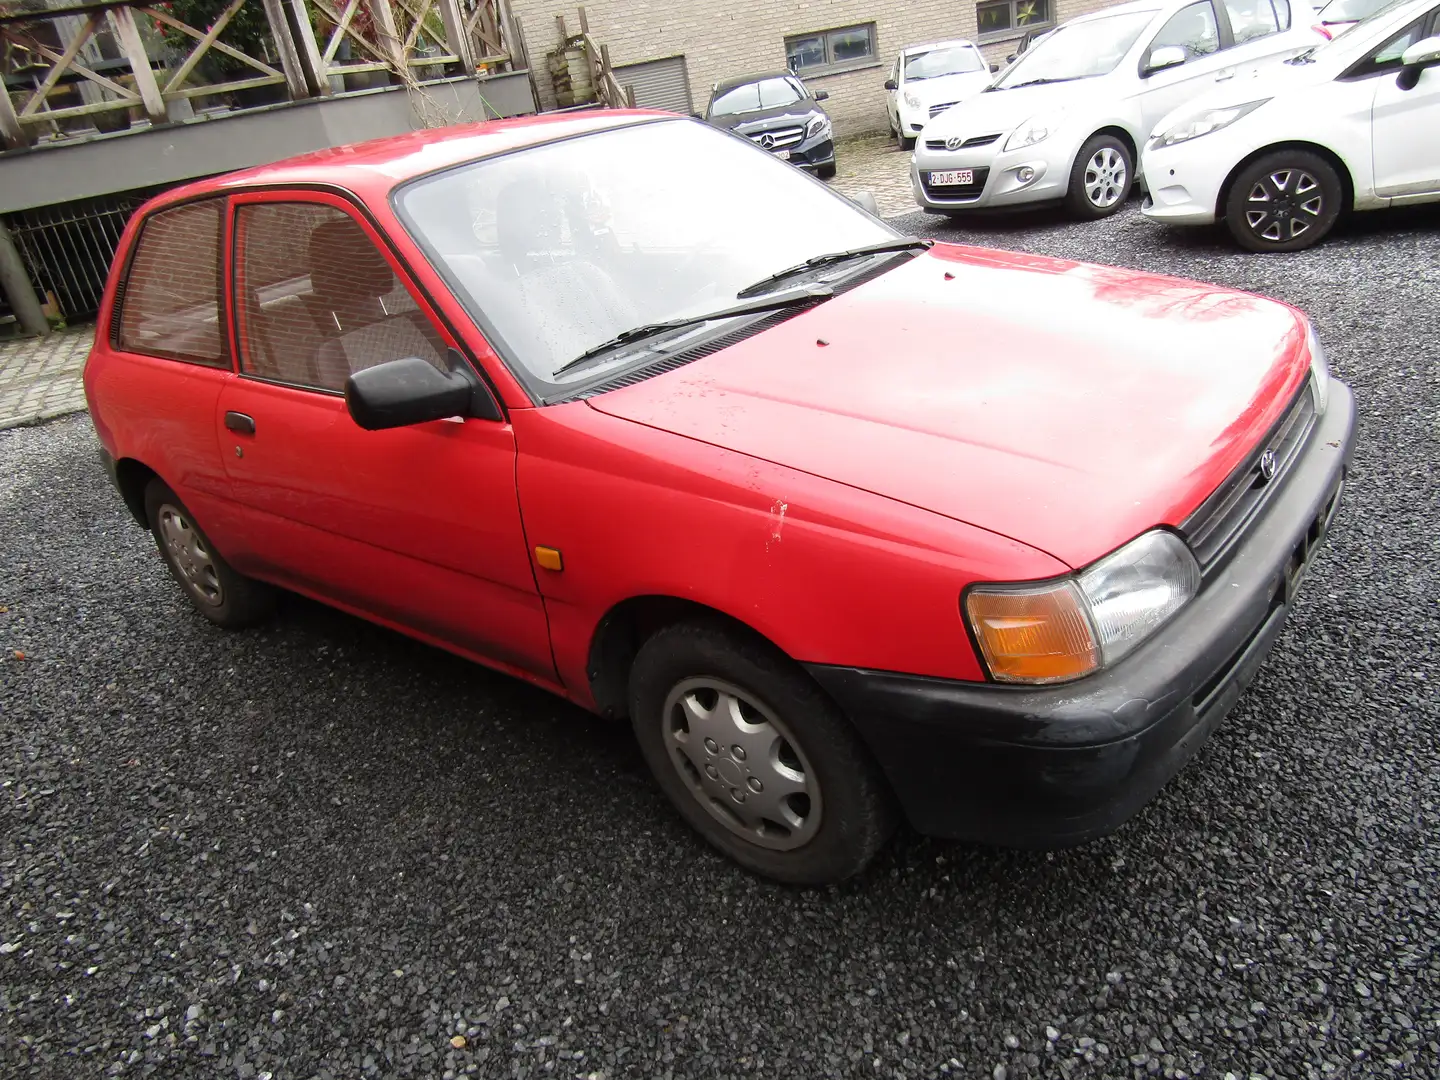 Toyota Starlet 1.0i (immatriculation ancêtre possible) 32 ans Rojo - 1